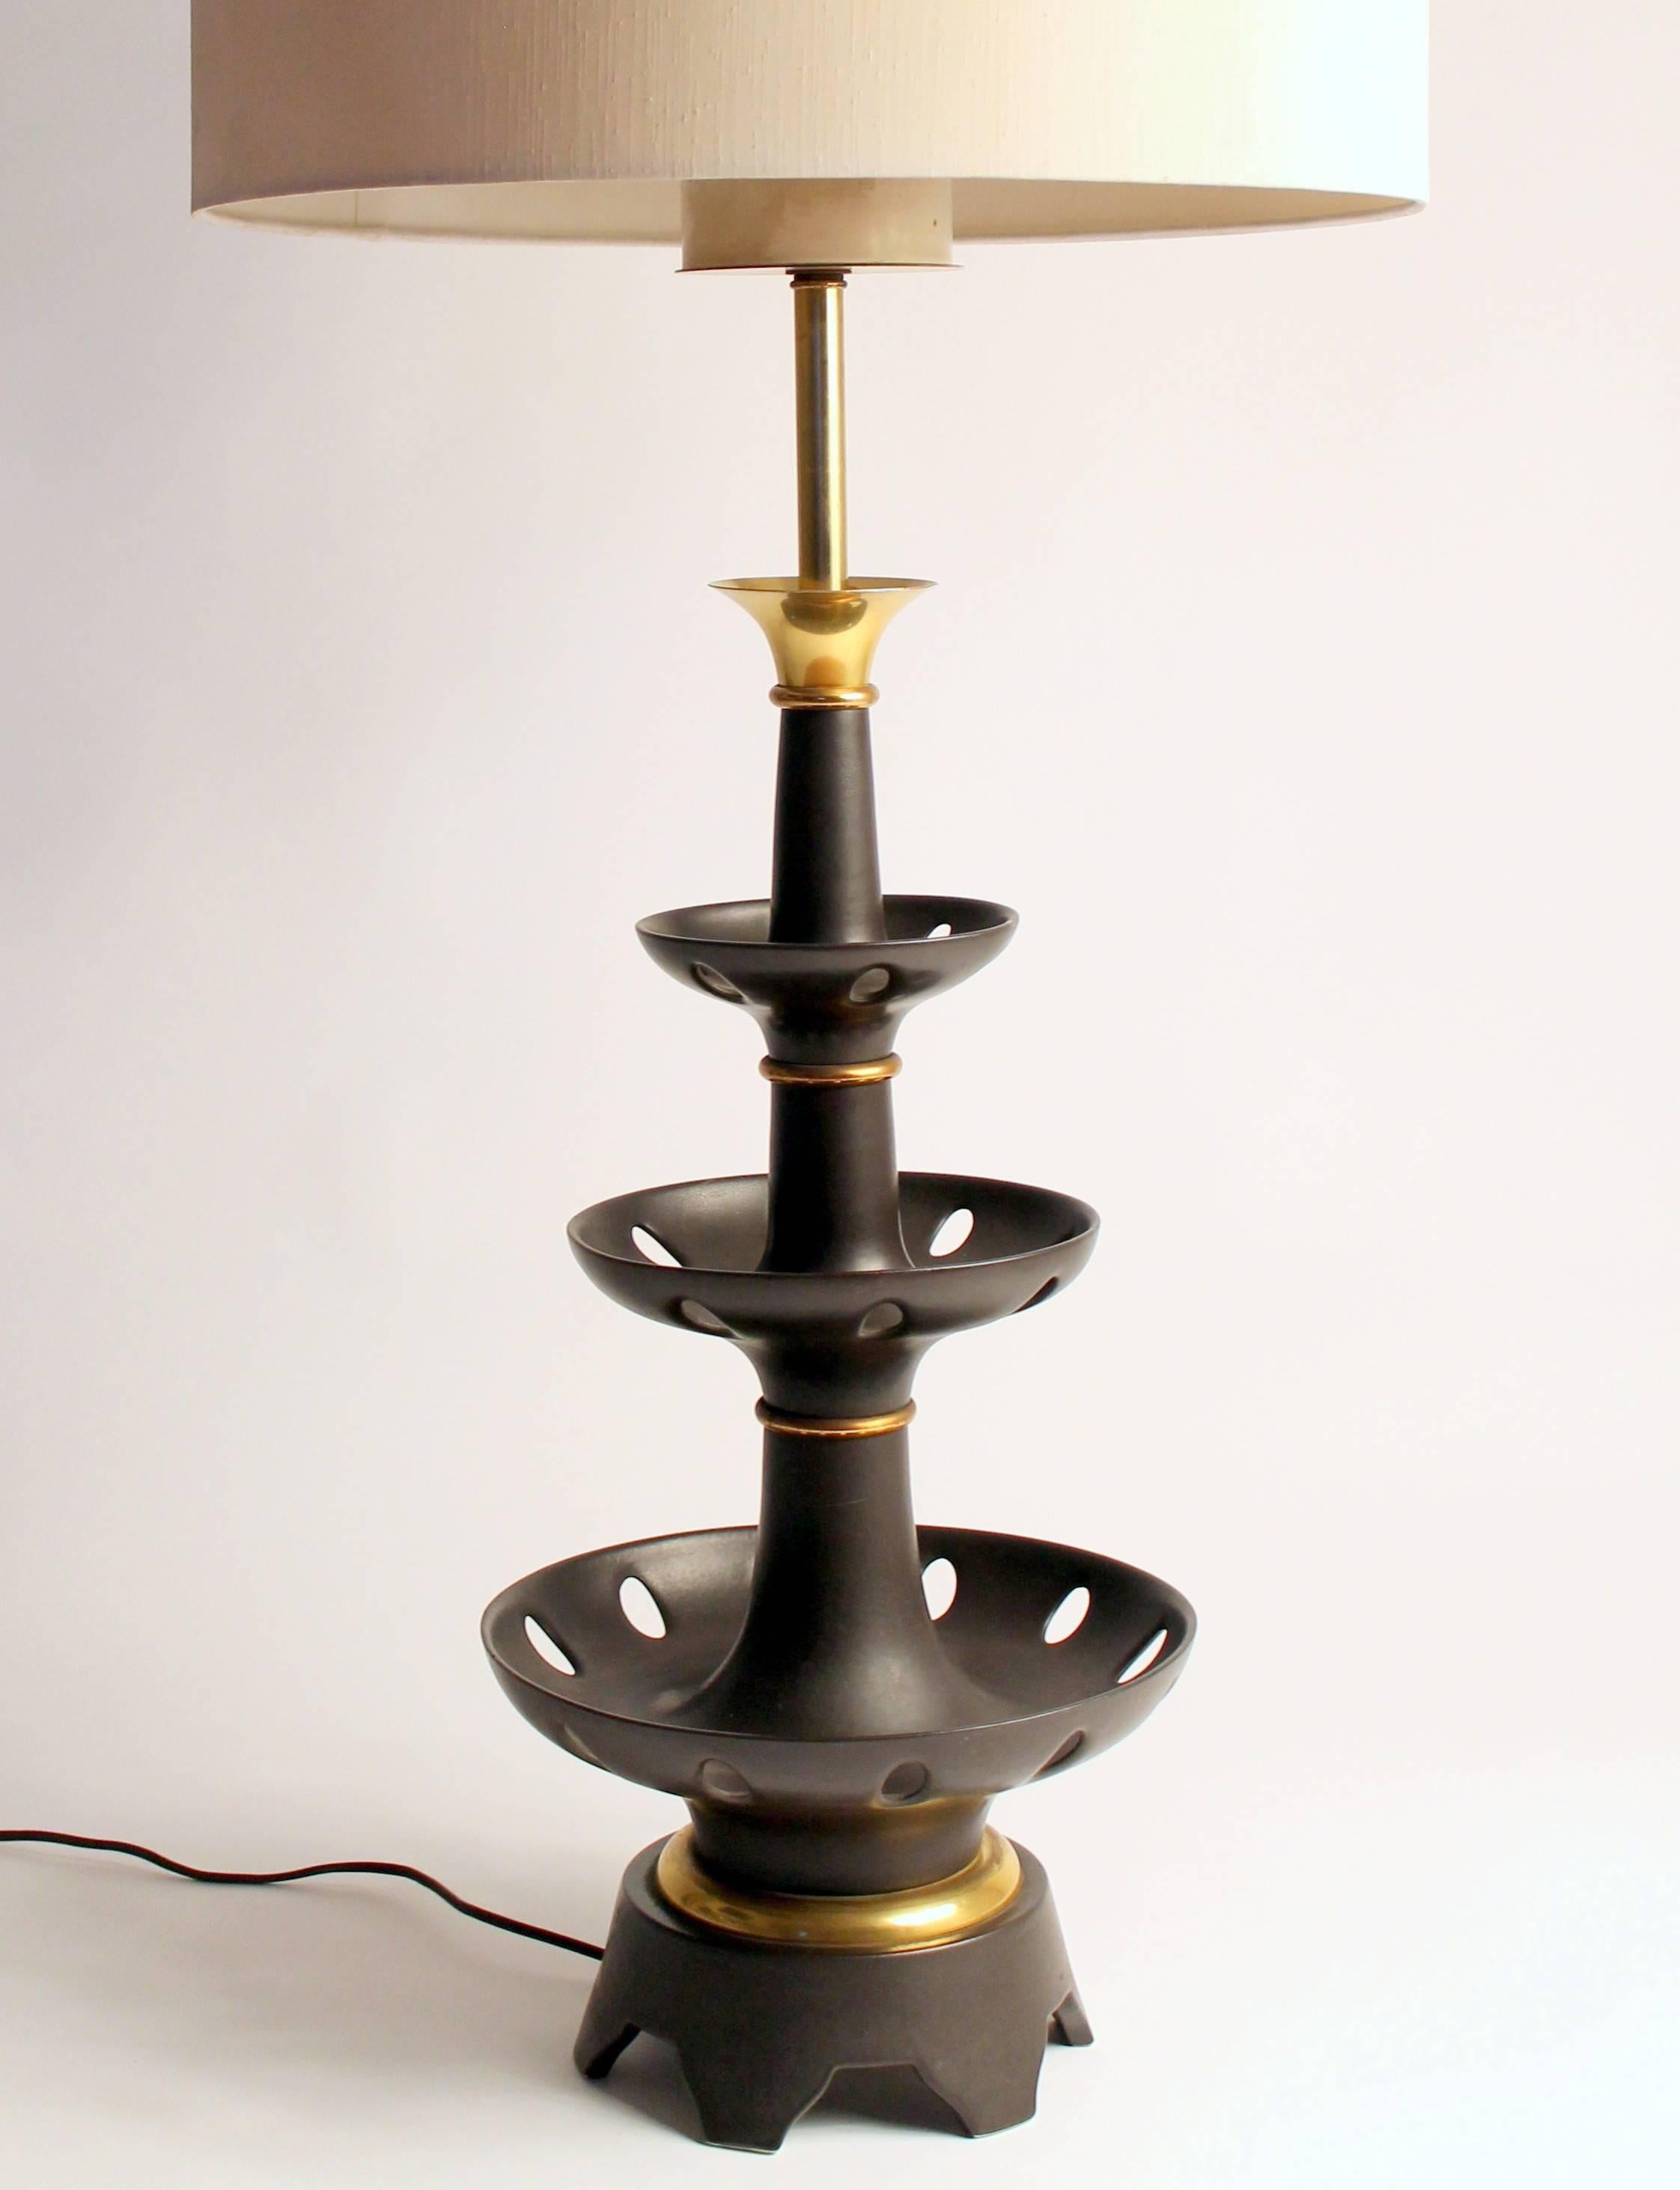 Huge in size and presence but elegant and refined with its prime quality dark brown porcelain bowl, brass hardware and accent.

Measure 41 inches high to finial tips.

Three regular E26 size socket rated at 60 watts each. 

Three-way pull